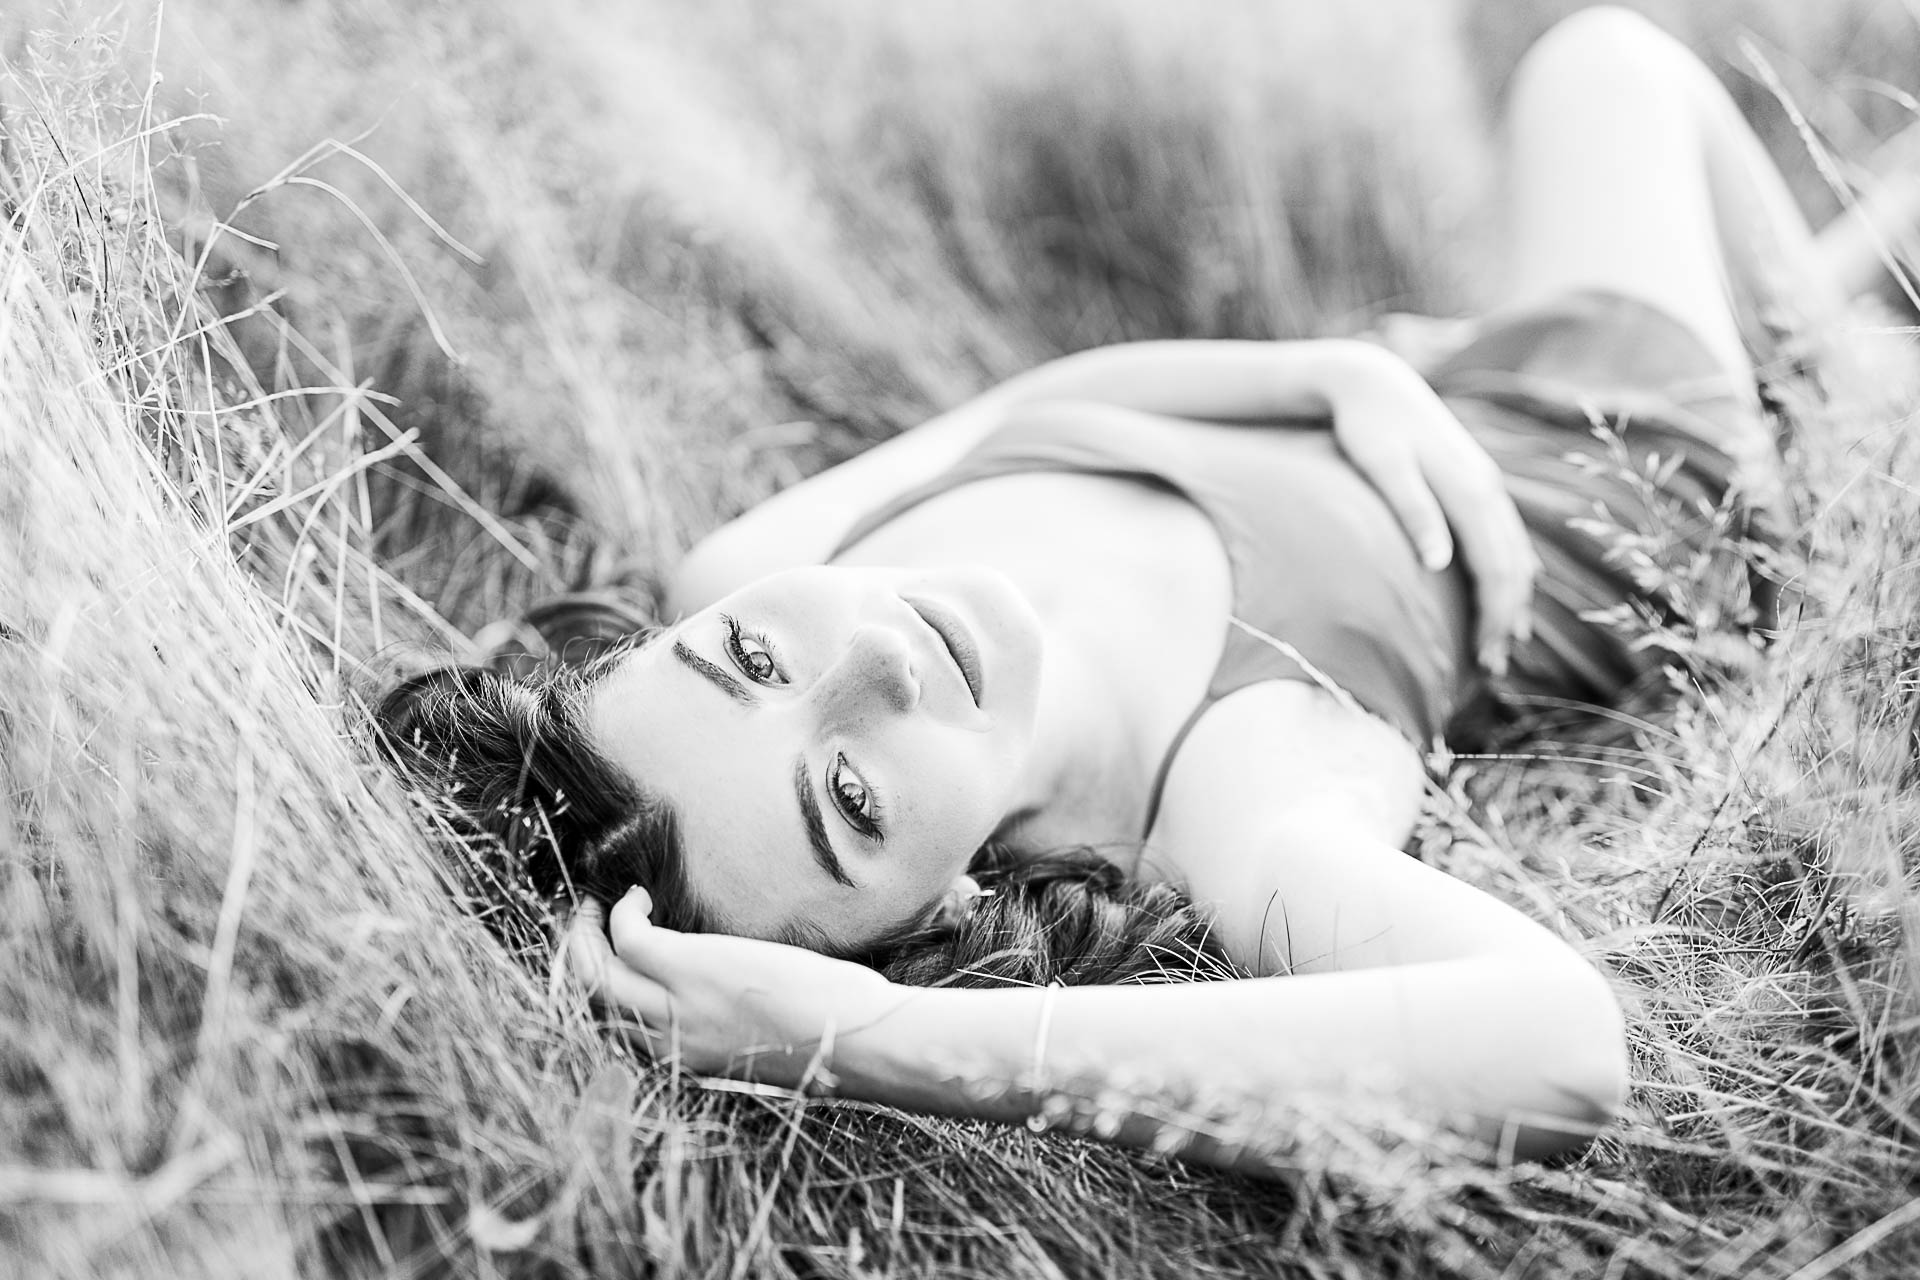 Photo by Duxbury senior portrait photographer Christina Runnals | High school senior girl wearing a dress and laying in a field | Hot senior pictures